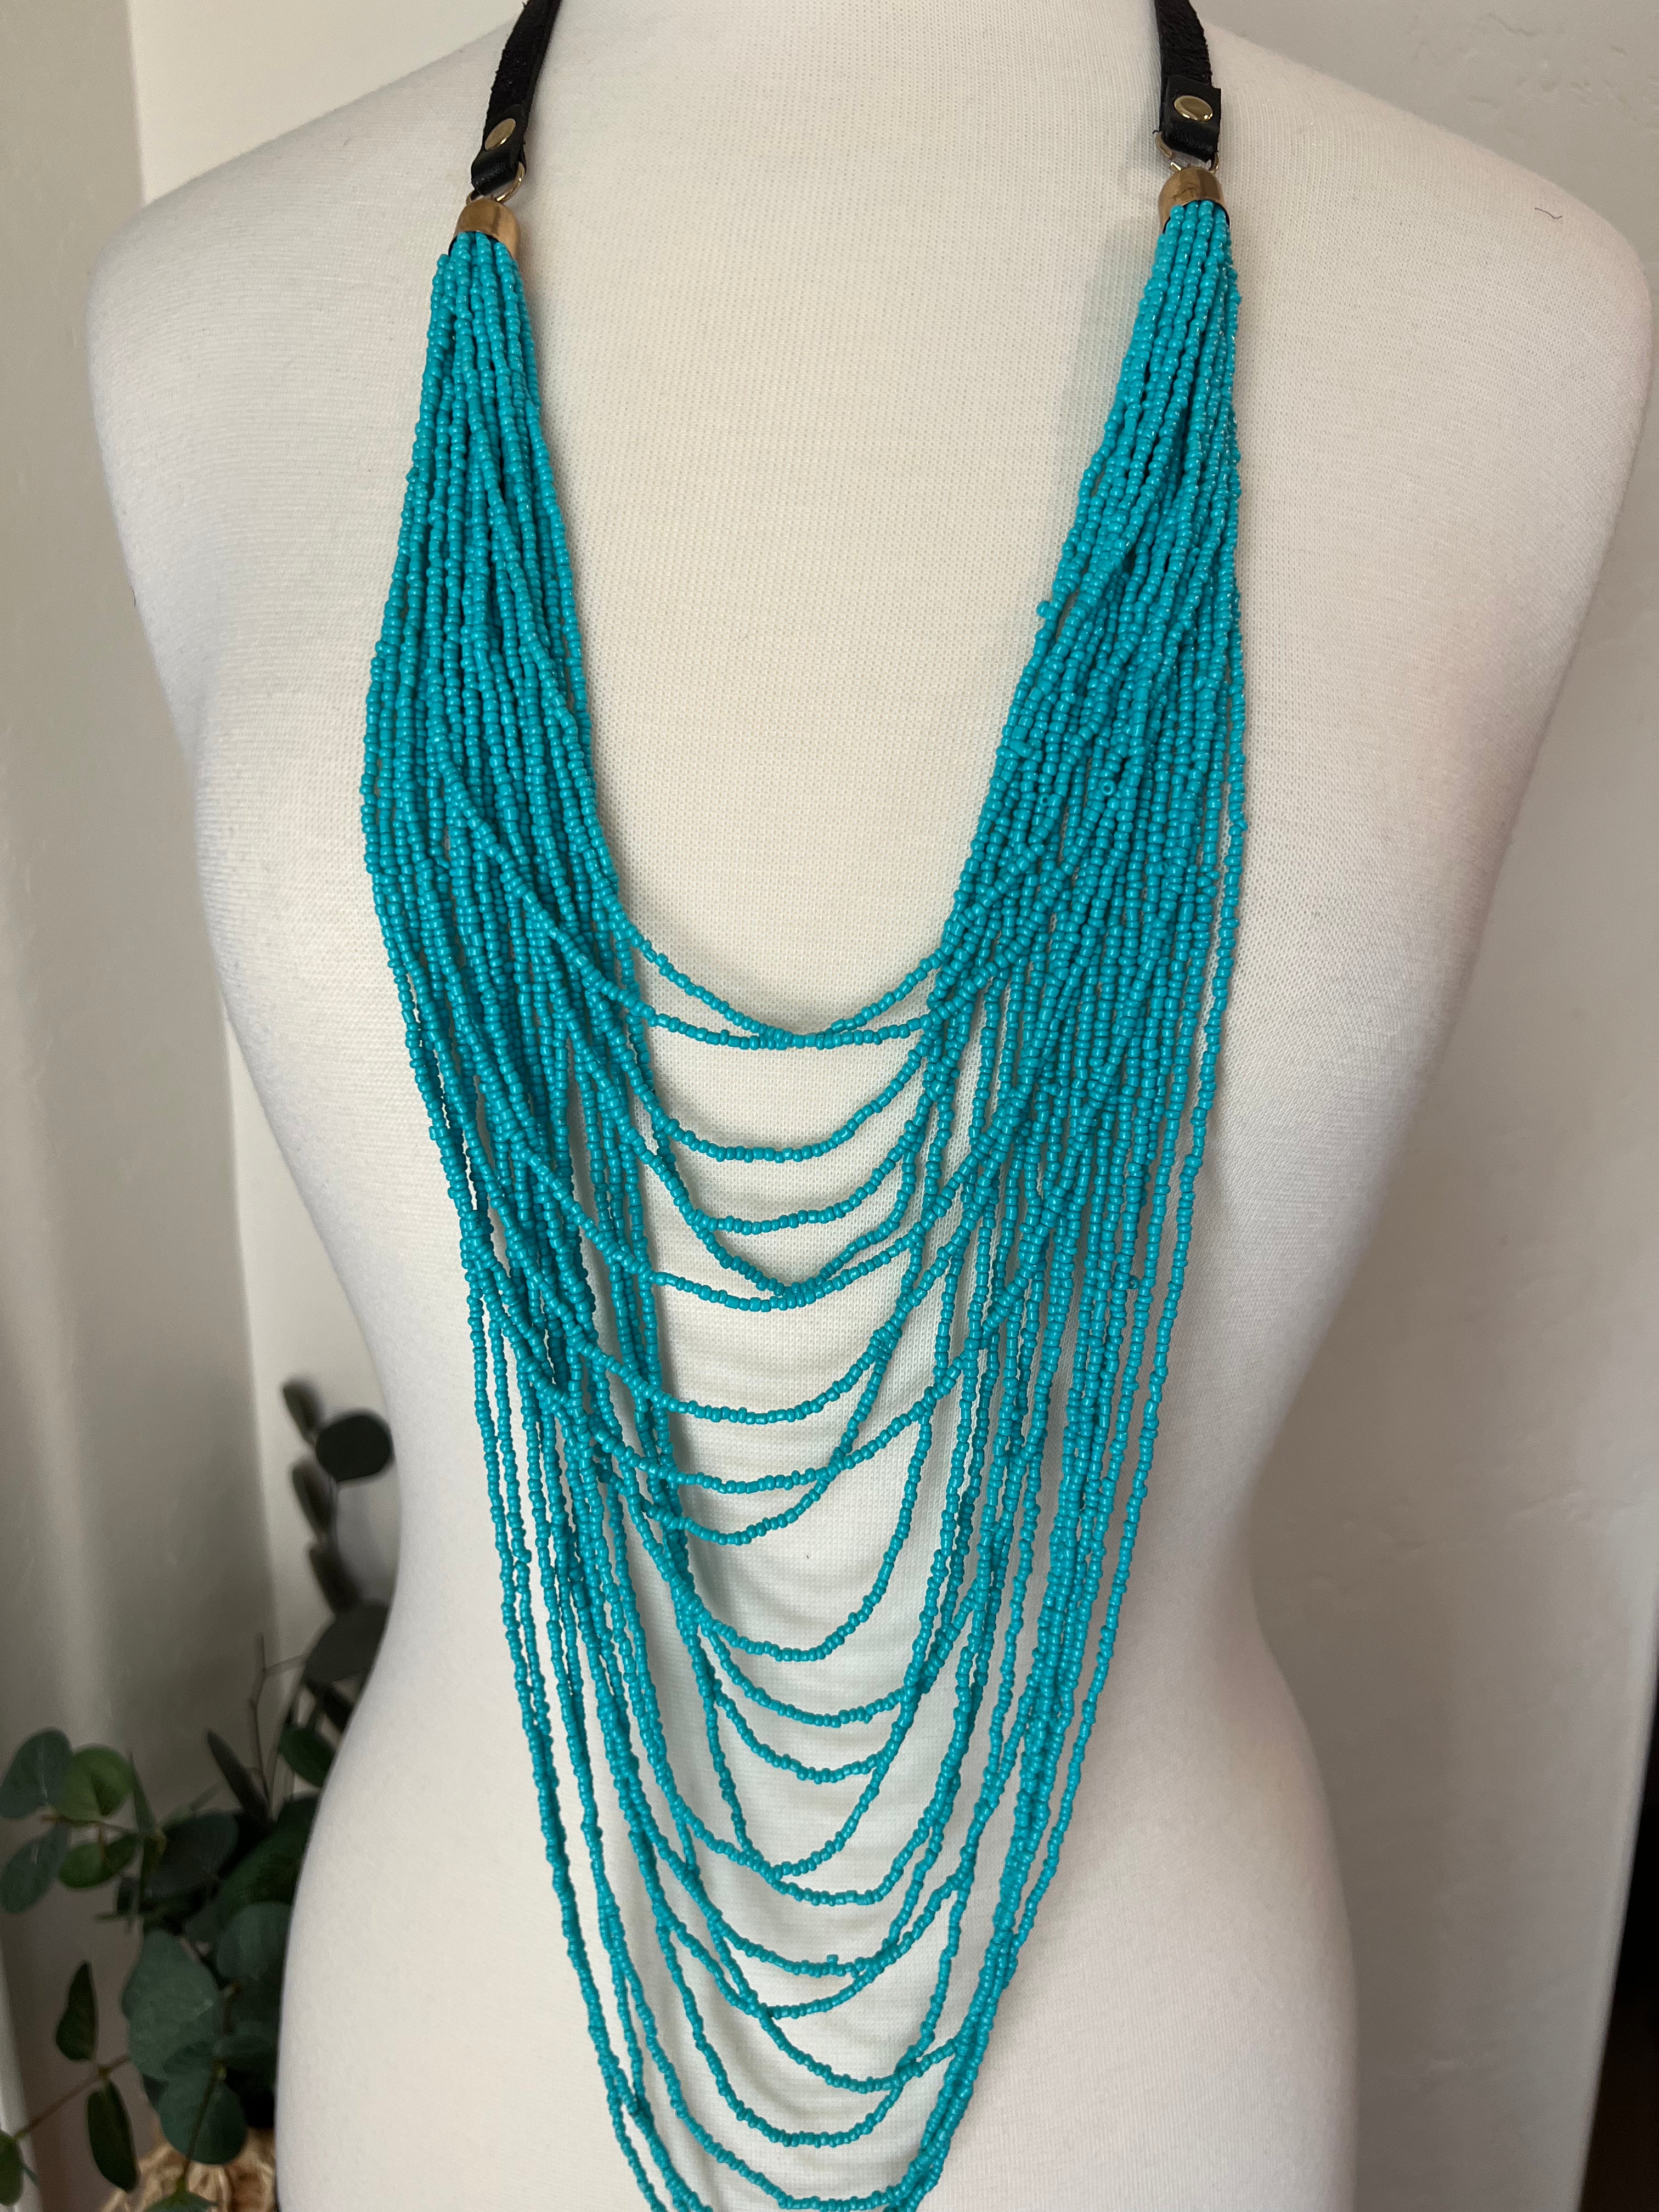 NEW Turquoise Multi Strand Necklace